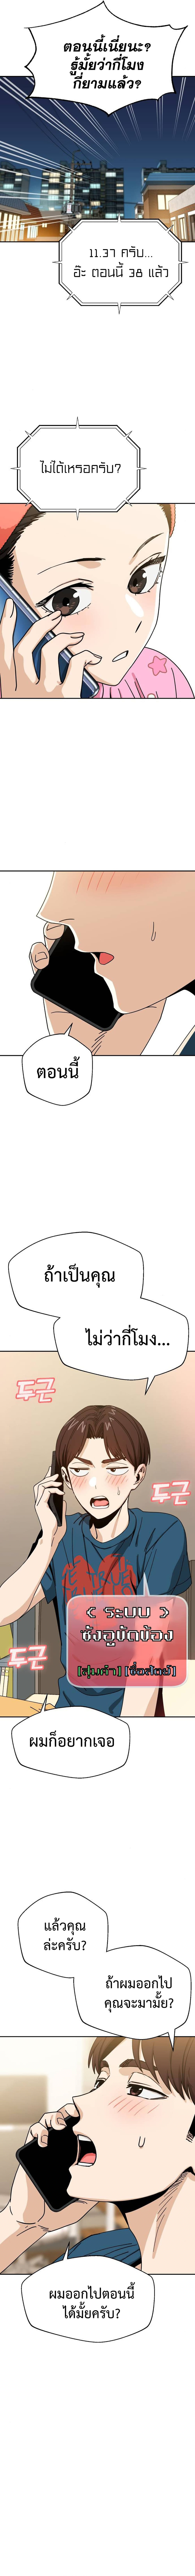 Match Made in Heaven by chance ตอนที่ 30 (11)